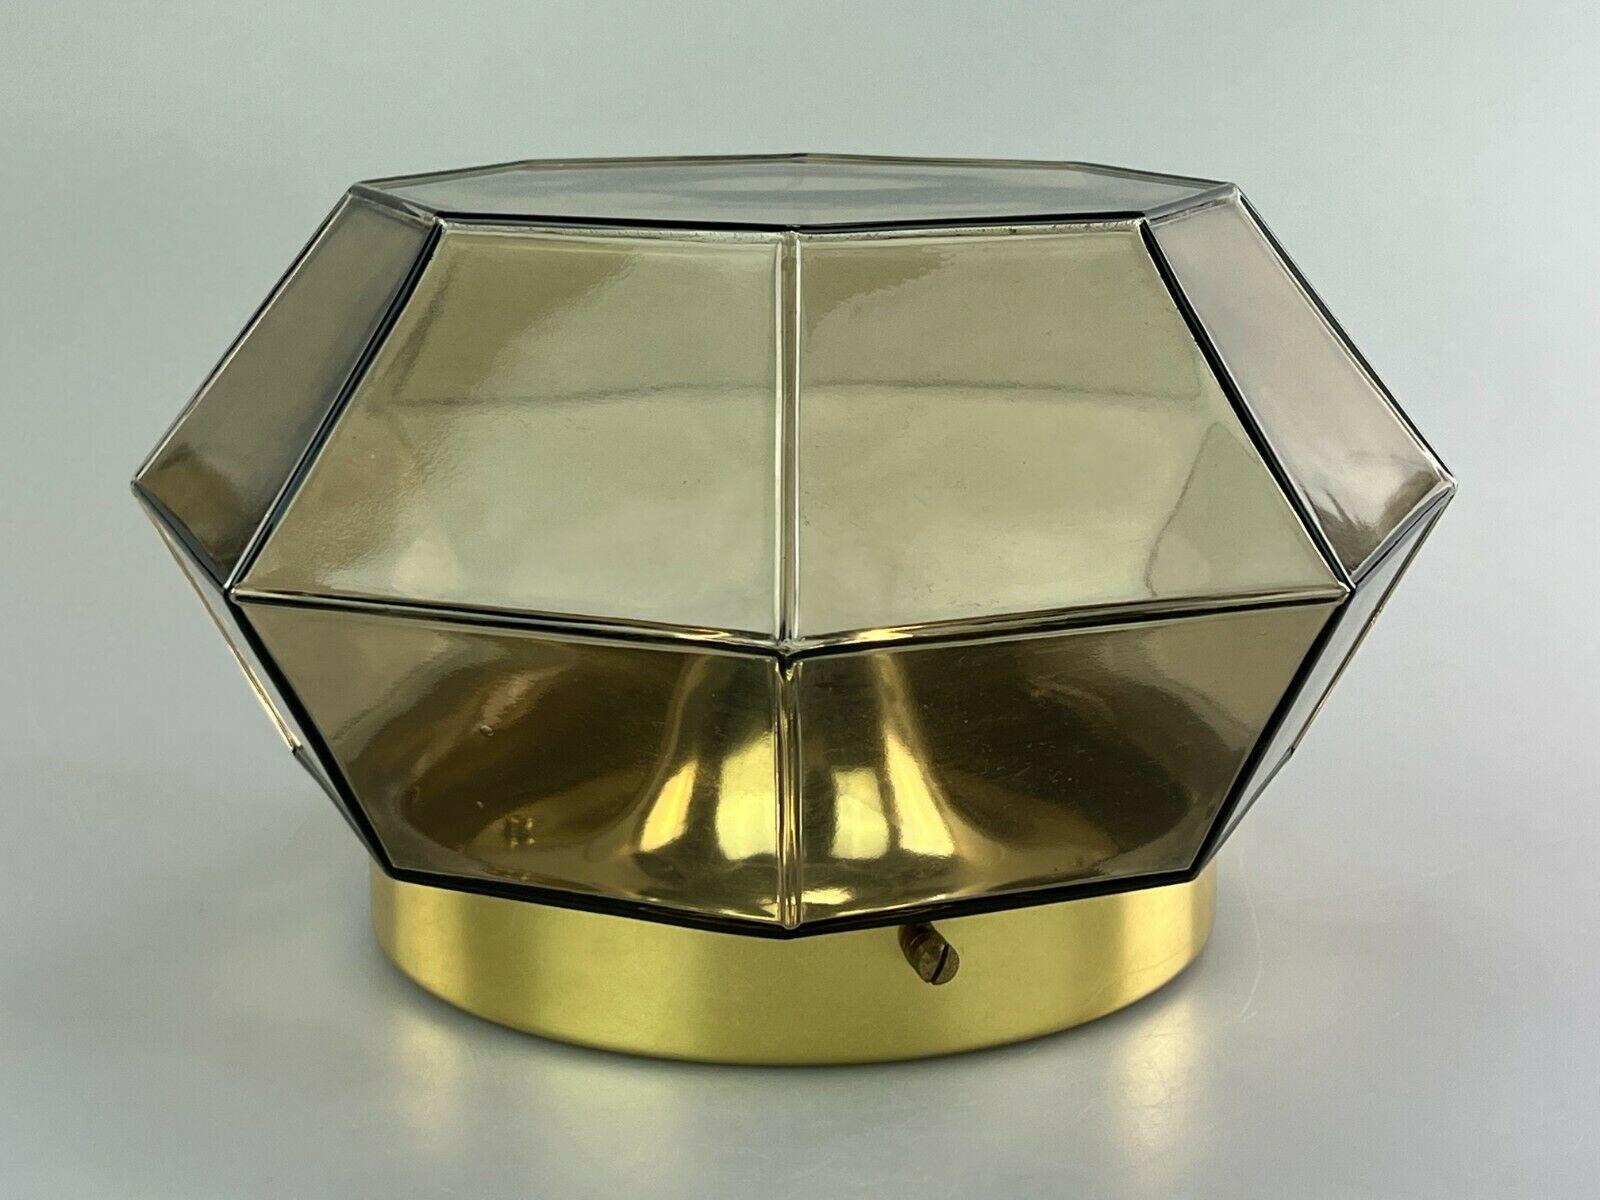 60s 70s lamp light wall lamp Limburg Plafoniere Space Age Design 60s

Object: wall lamp

Manufacturer: Glashütte Limburg

Condition: good

Age: around 1960-1970

Dimensions:

Diameter = 31.5cm
Height = 18cm

Other notes:

The